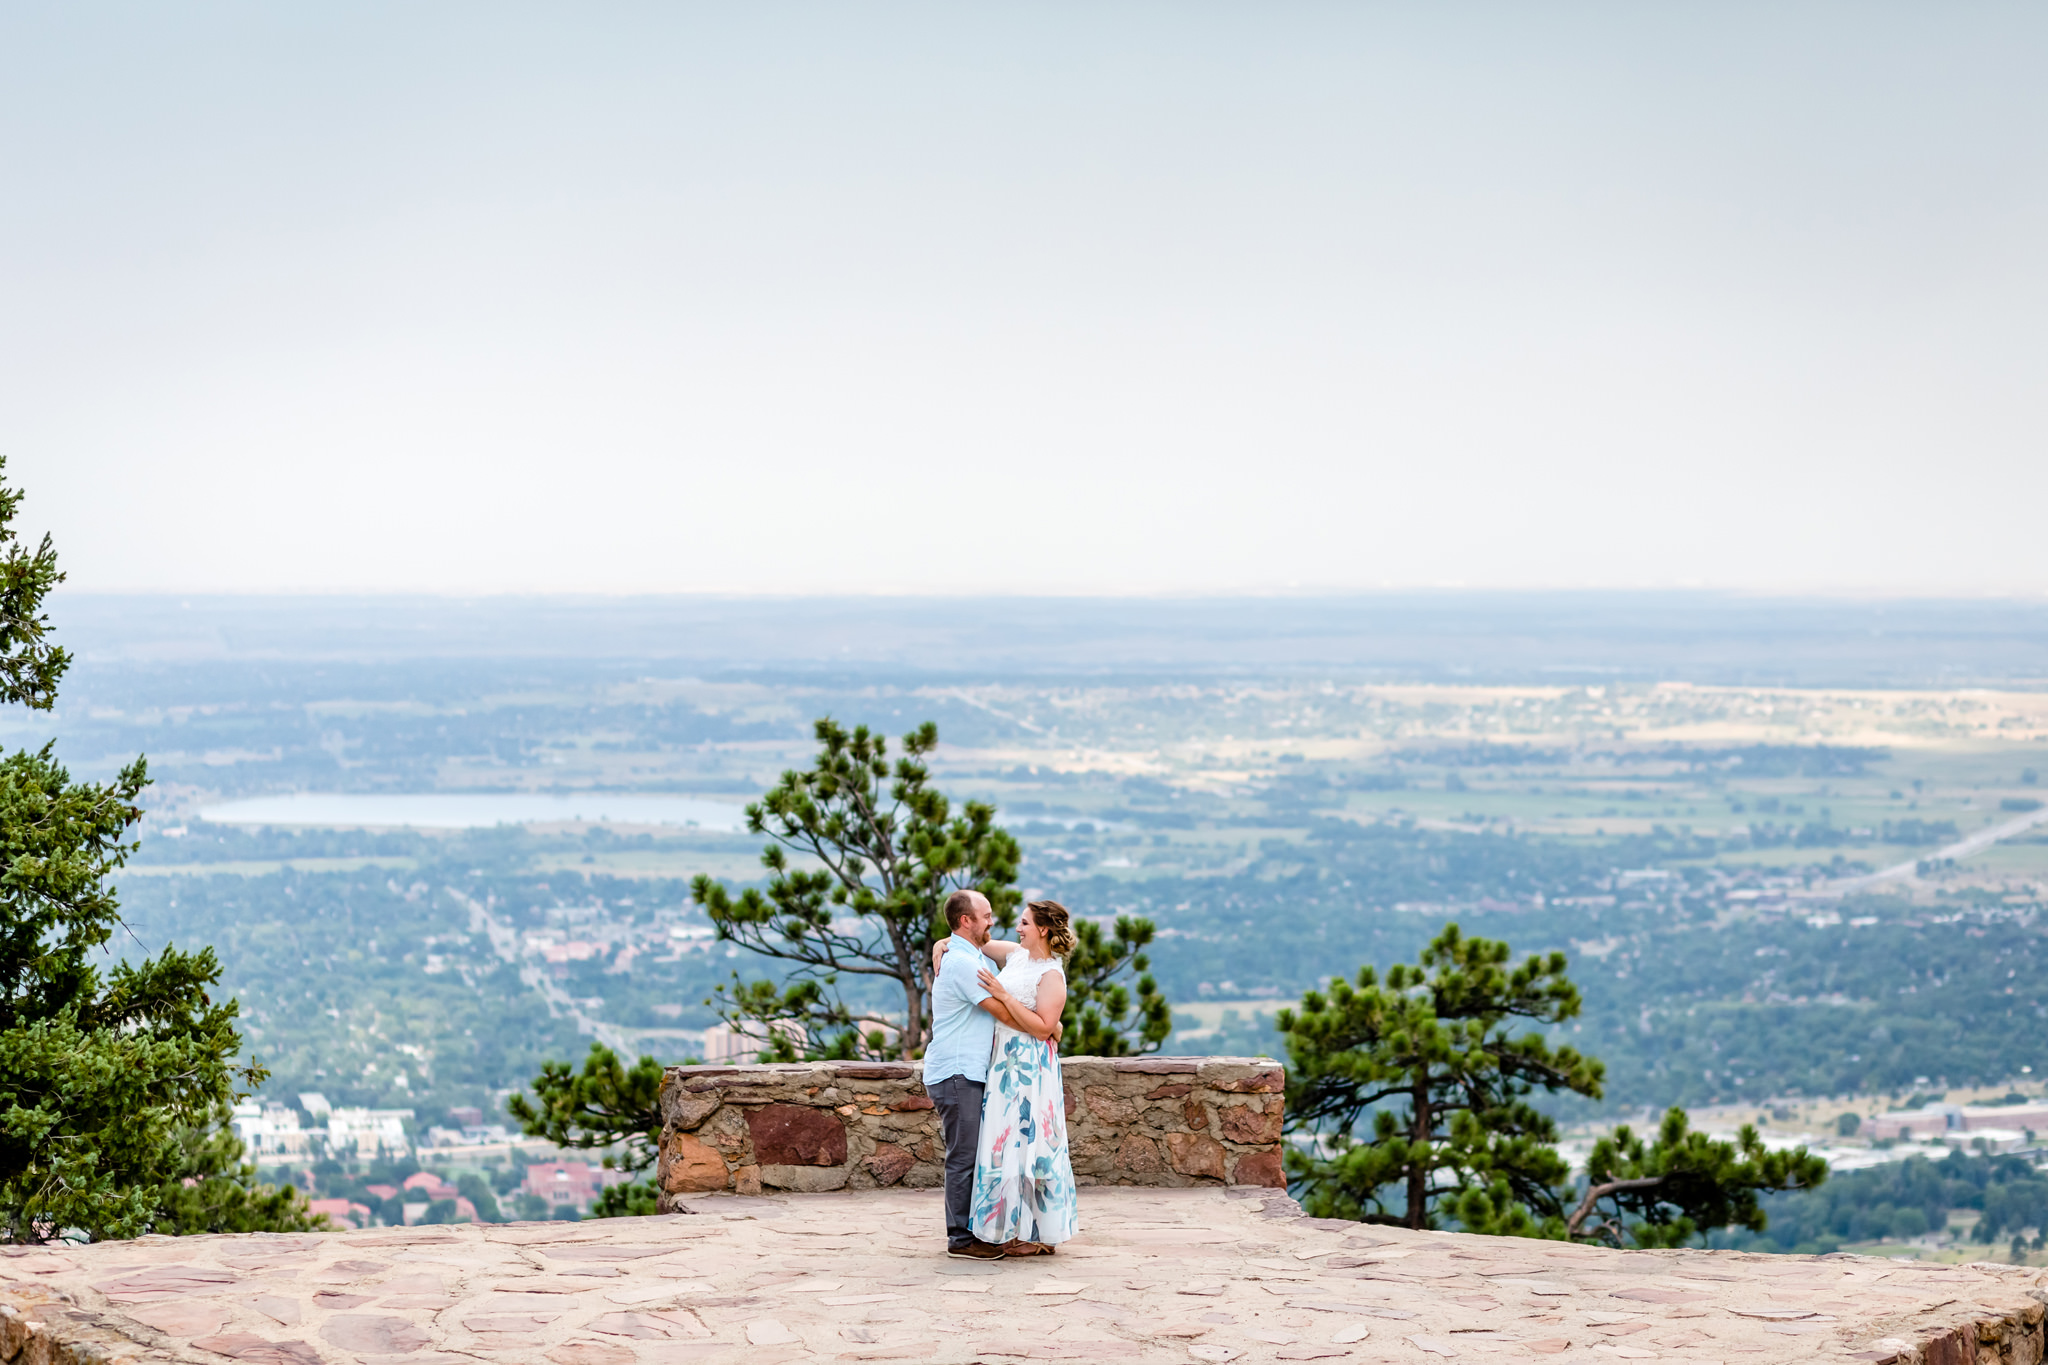 Lauren & Taylor practicing their first dance at Sunrise Amphitheater. Mountain Fall Engagement Session by Colorado Engagement Photographer, Jennifer Garza. Colorado Fall Engagement, Colorado Fall Engagement Photos, Fall Engagement Photography, Fall Engagement Photos, Colorado Engagement Photographer, Colorado Engagement Photography, Mountain Engagement Photographer, Mountain Engagement, Mountain Engagement Photos, Rocky Mountain Bride, Wedding Inspo, Wedding Season, Colorado Wedding, Colorado Bride, Bride to Be, Couples Goals